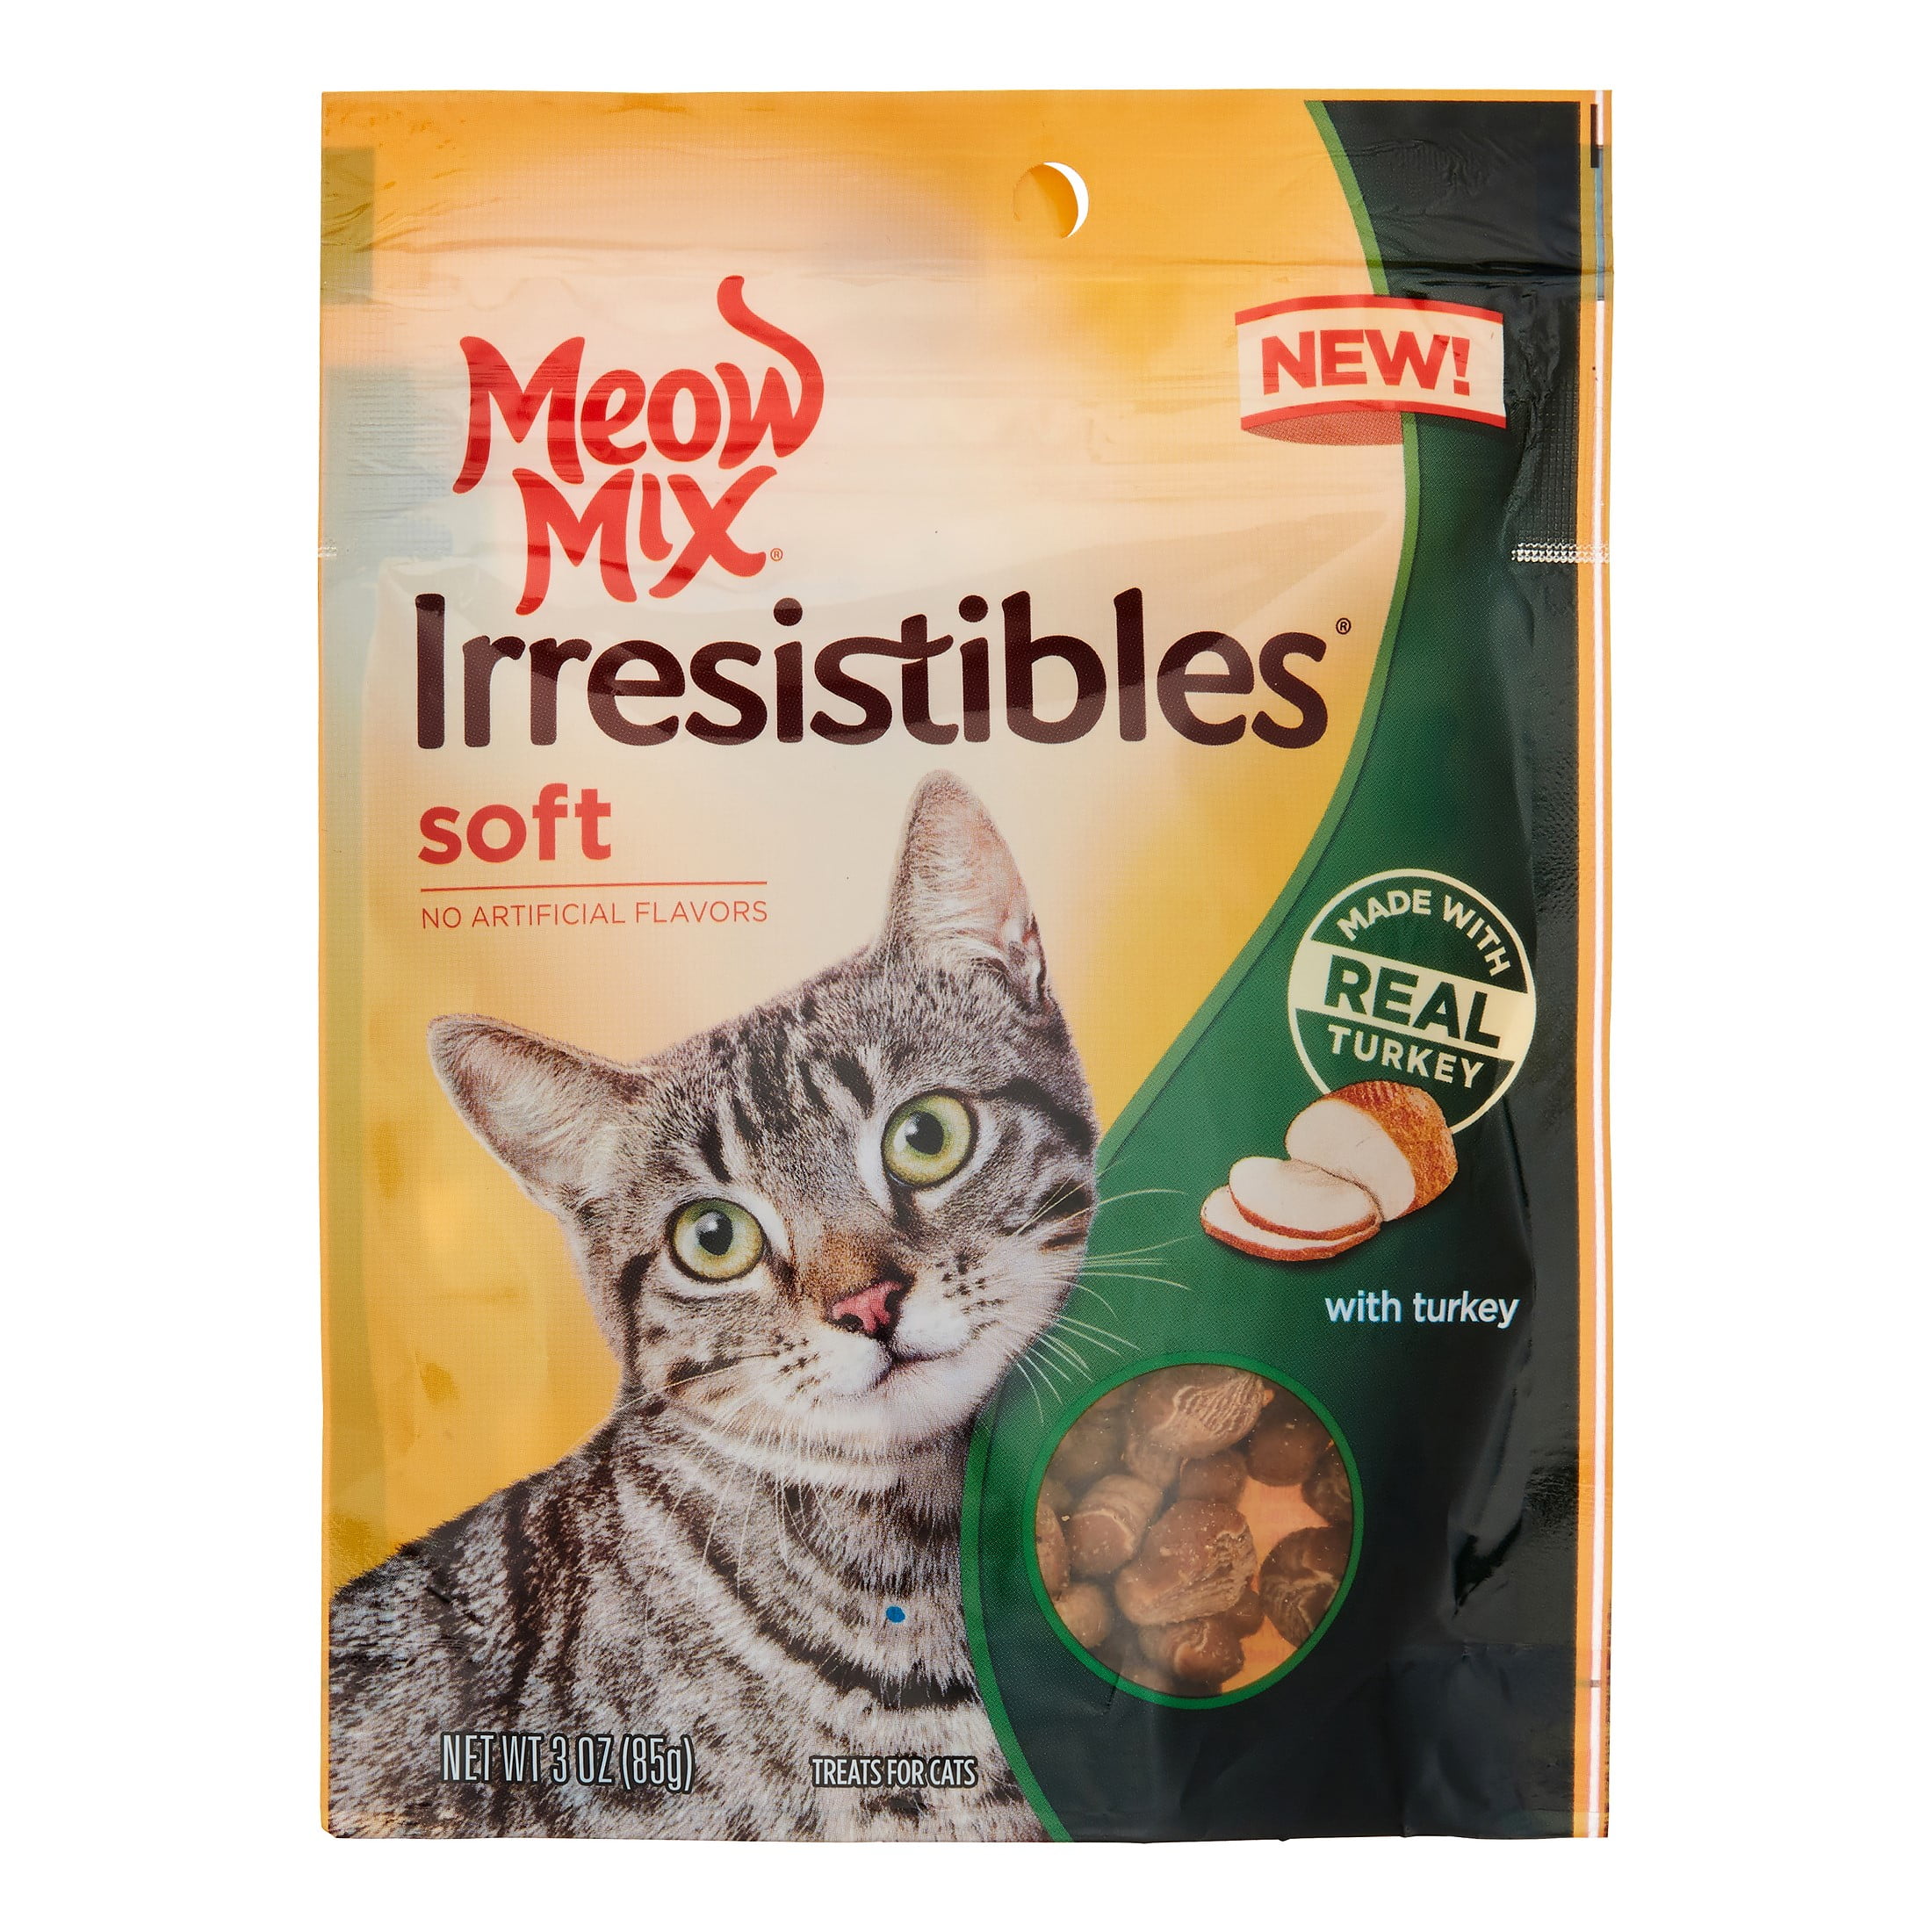 Meow Mix Irresistibles Cat Treats, Soft With Real Turkey Dry Walmart